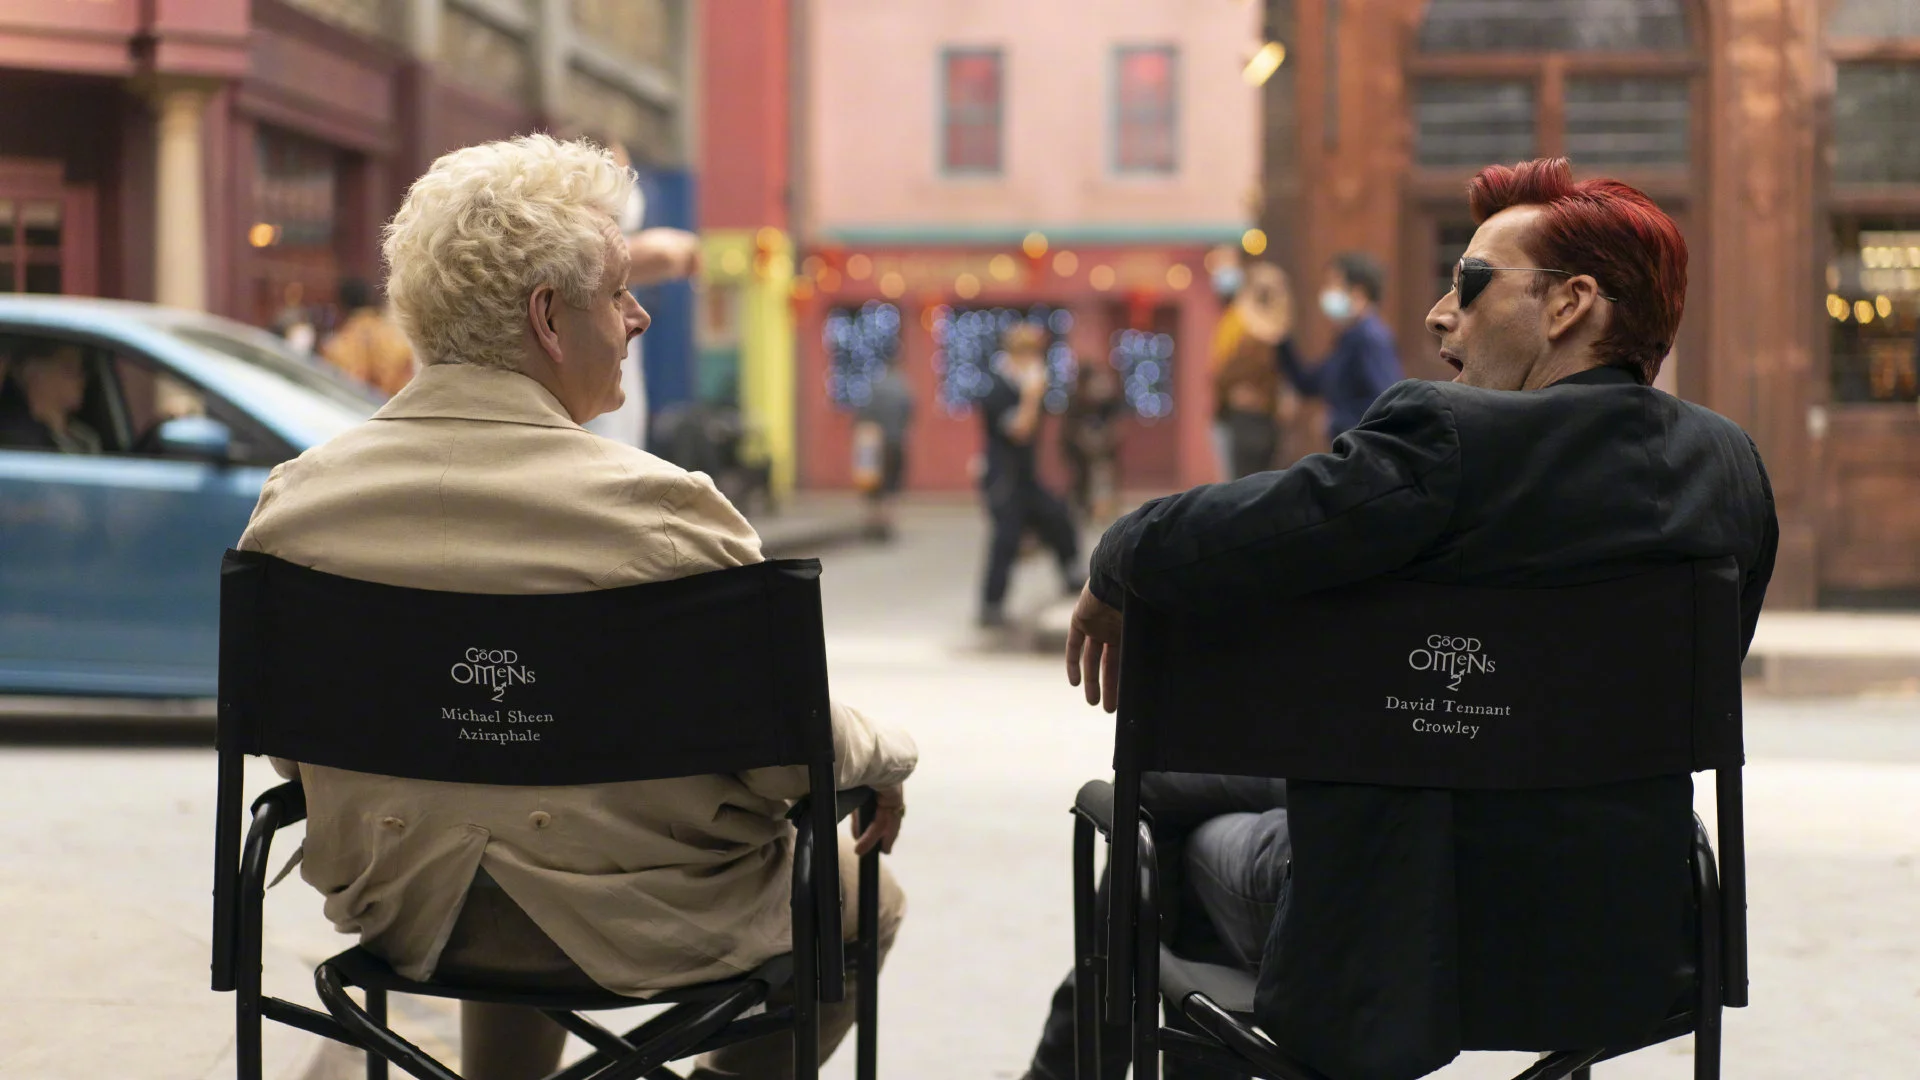 "Good Omens Season 2" has ended filming